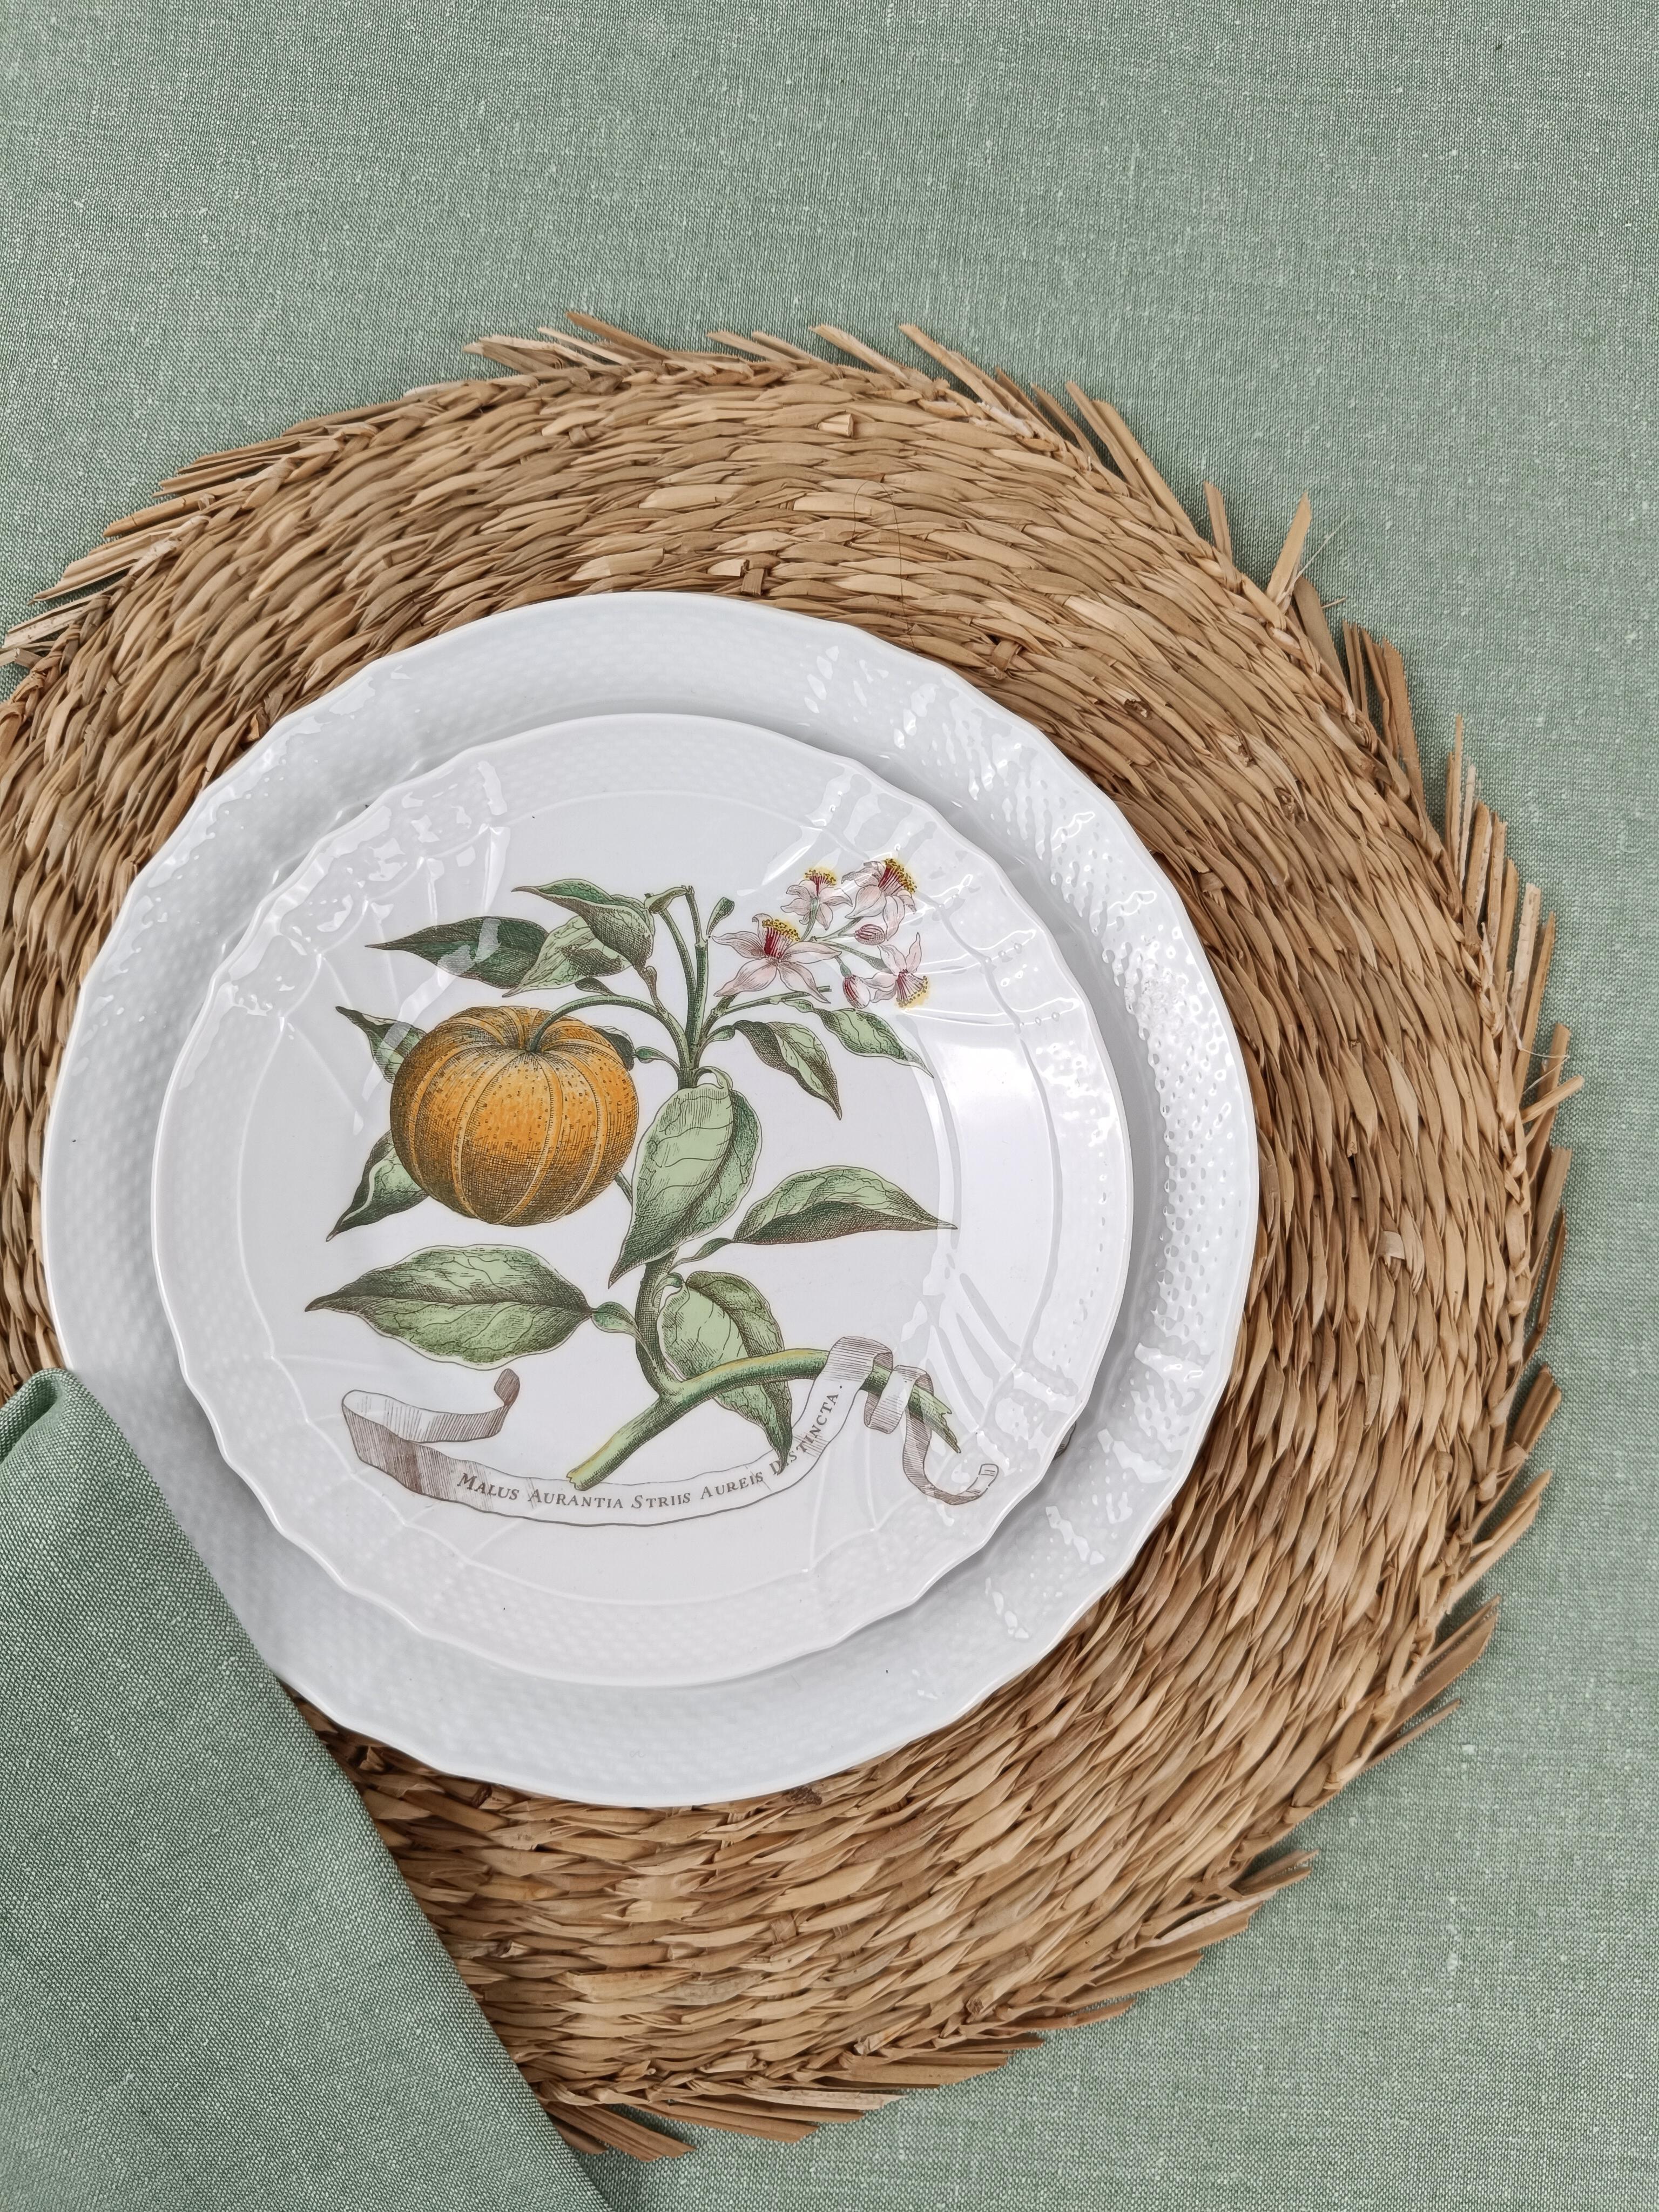 Late 20th Century Richard Ginori China Dinner Service with a botanical print by Munting Abraham For Sale